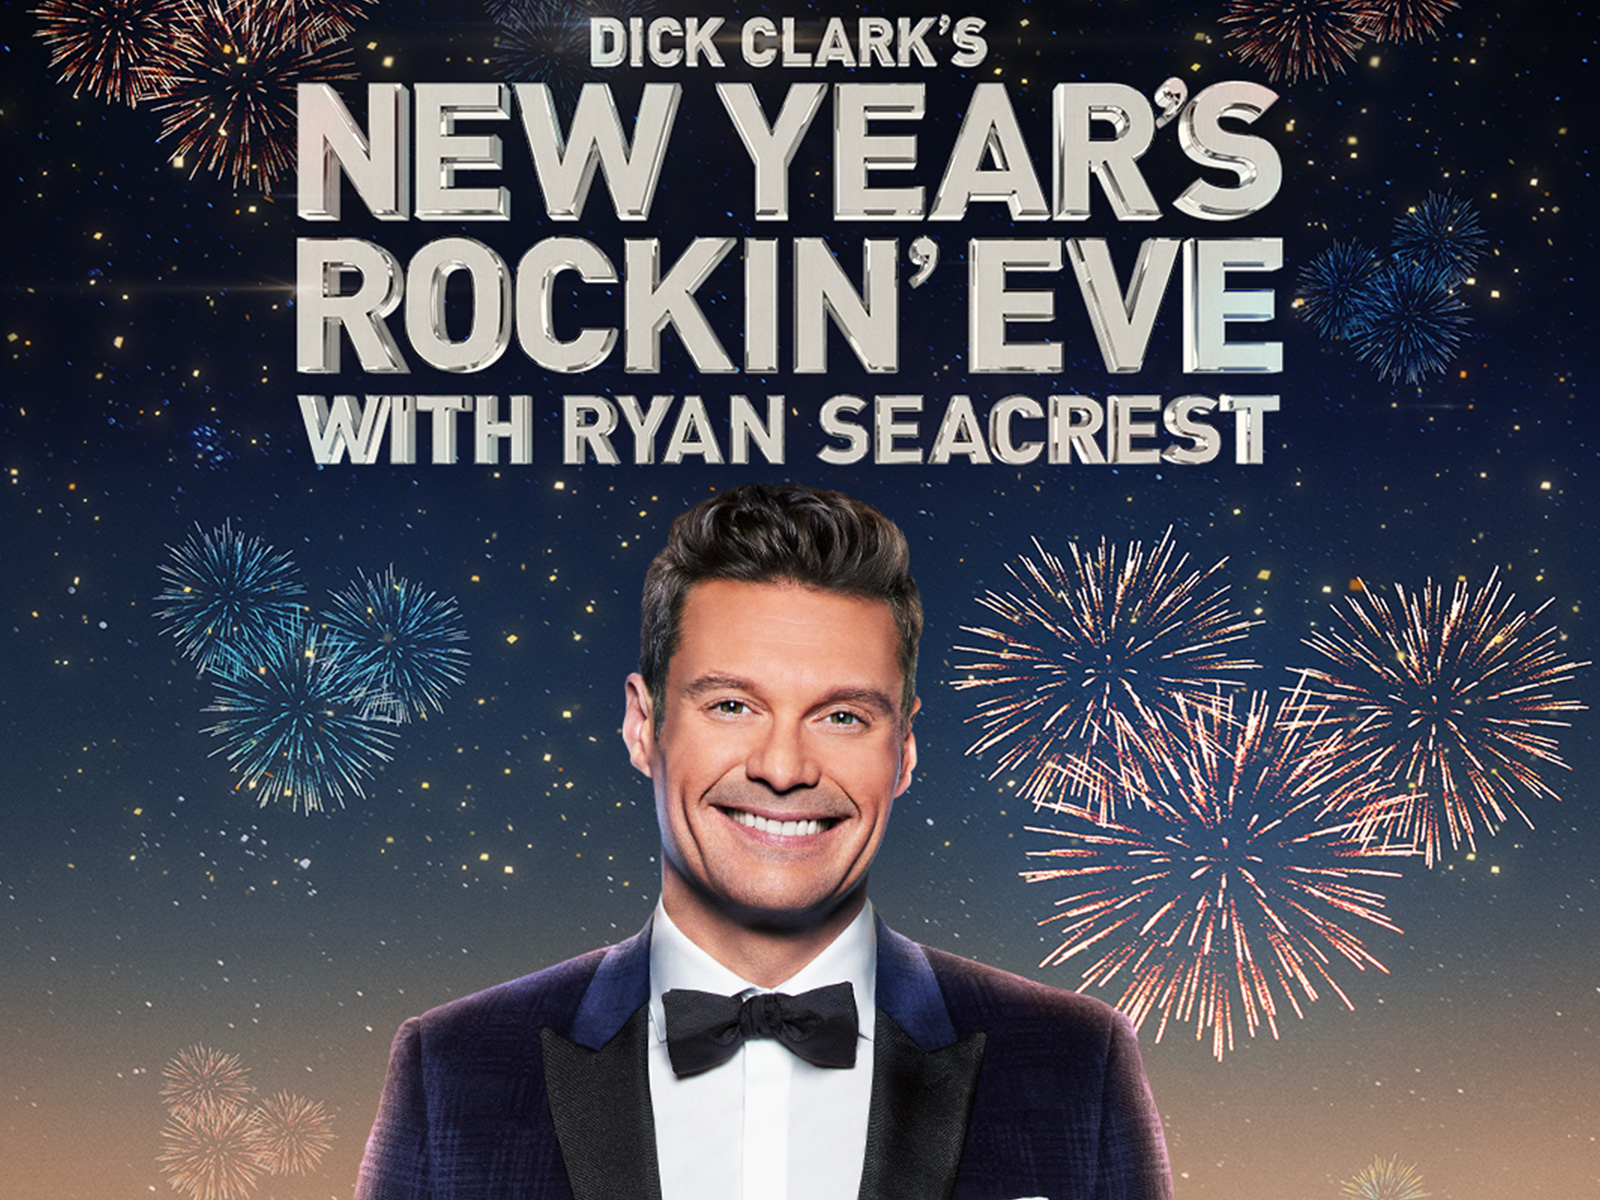 What station is dick clarks new years